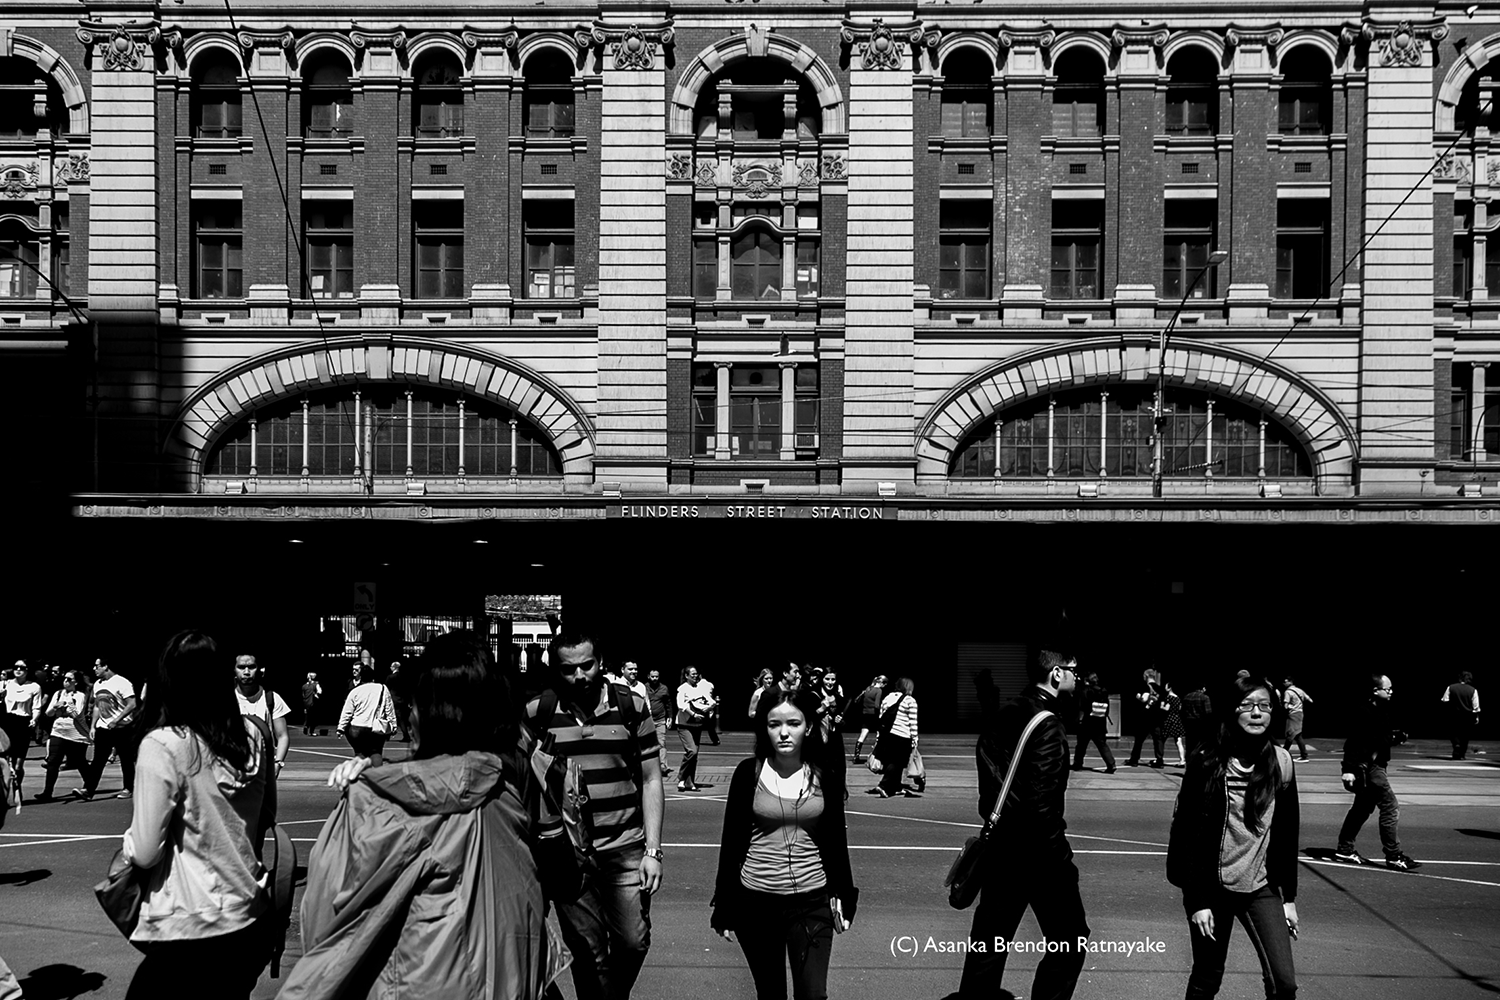 Commuters in front of Flinders Street Station